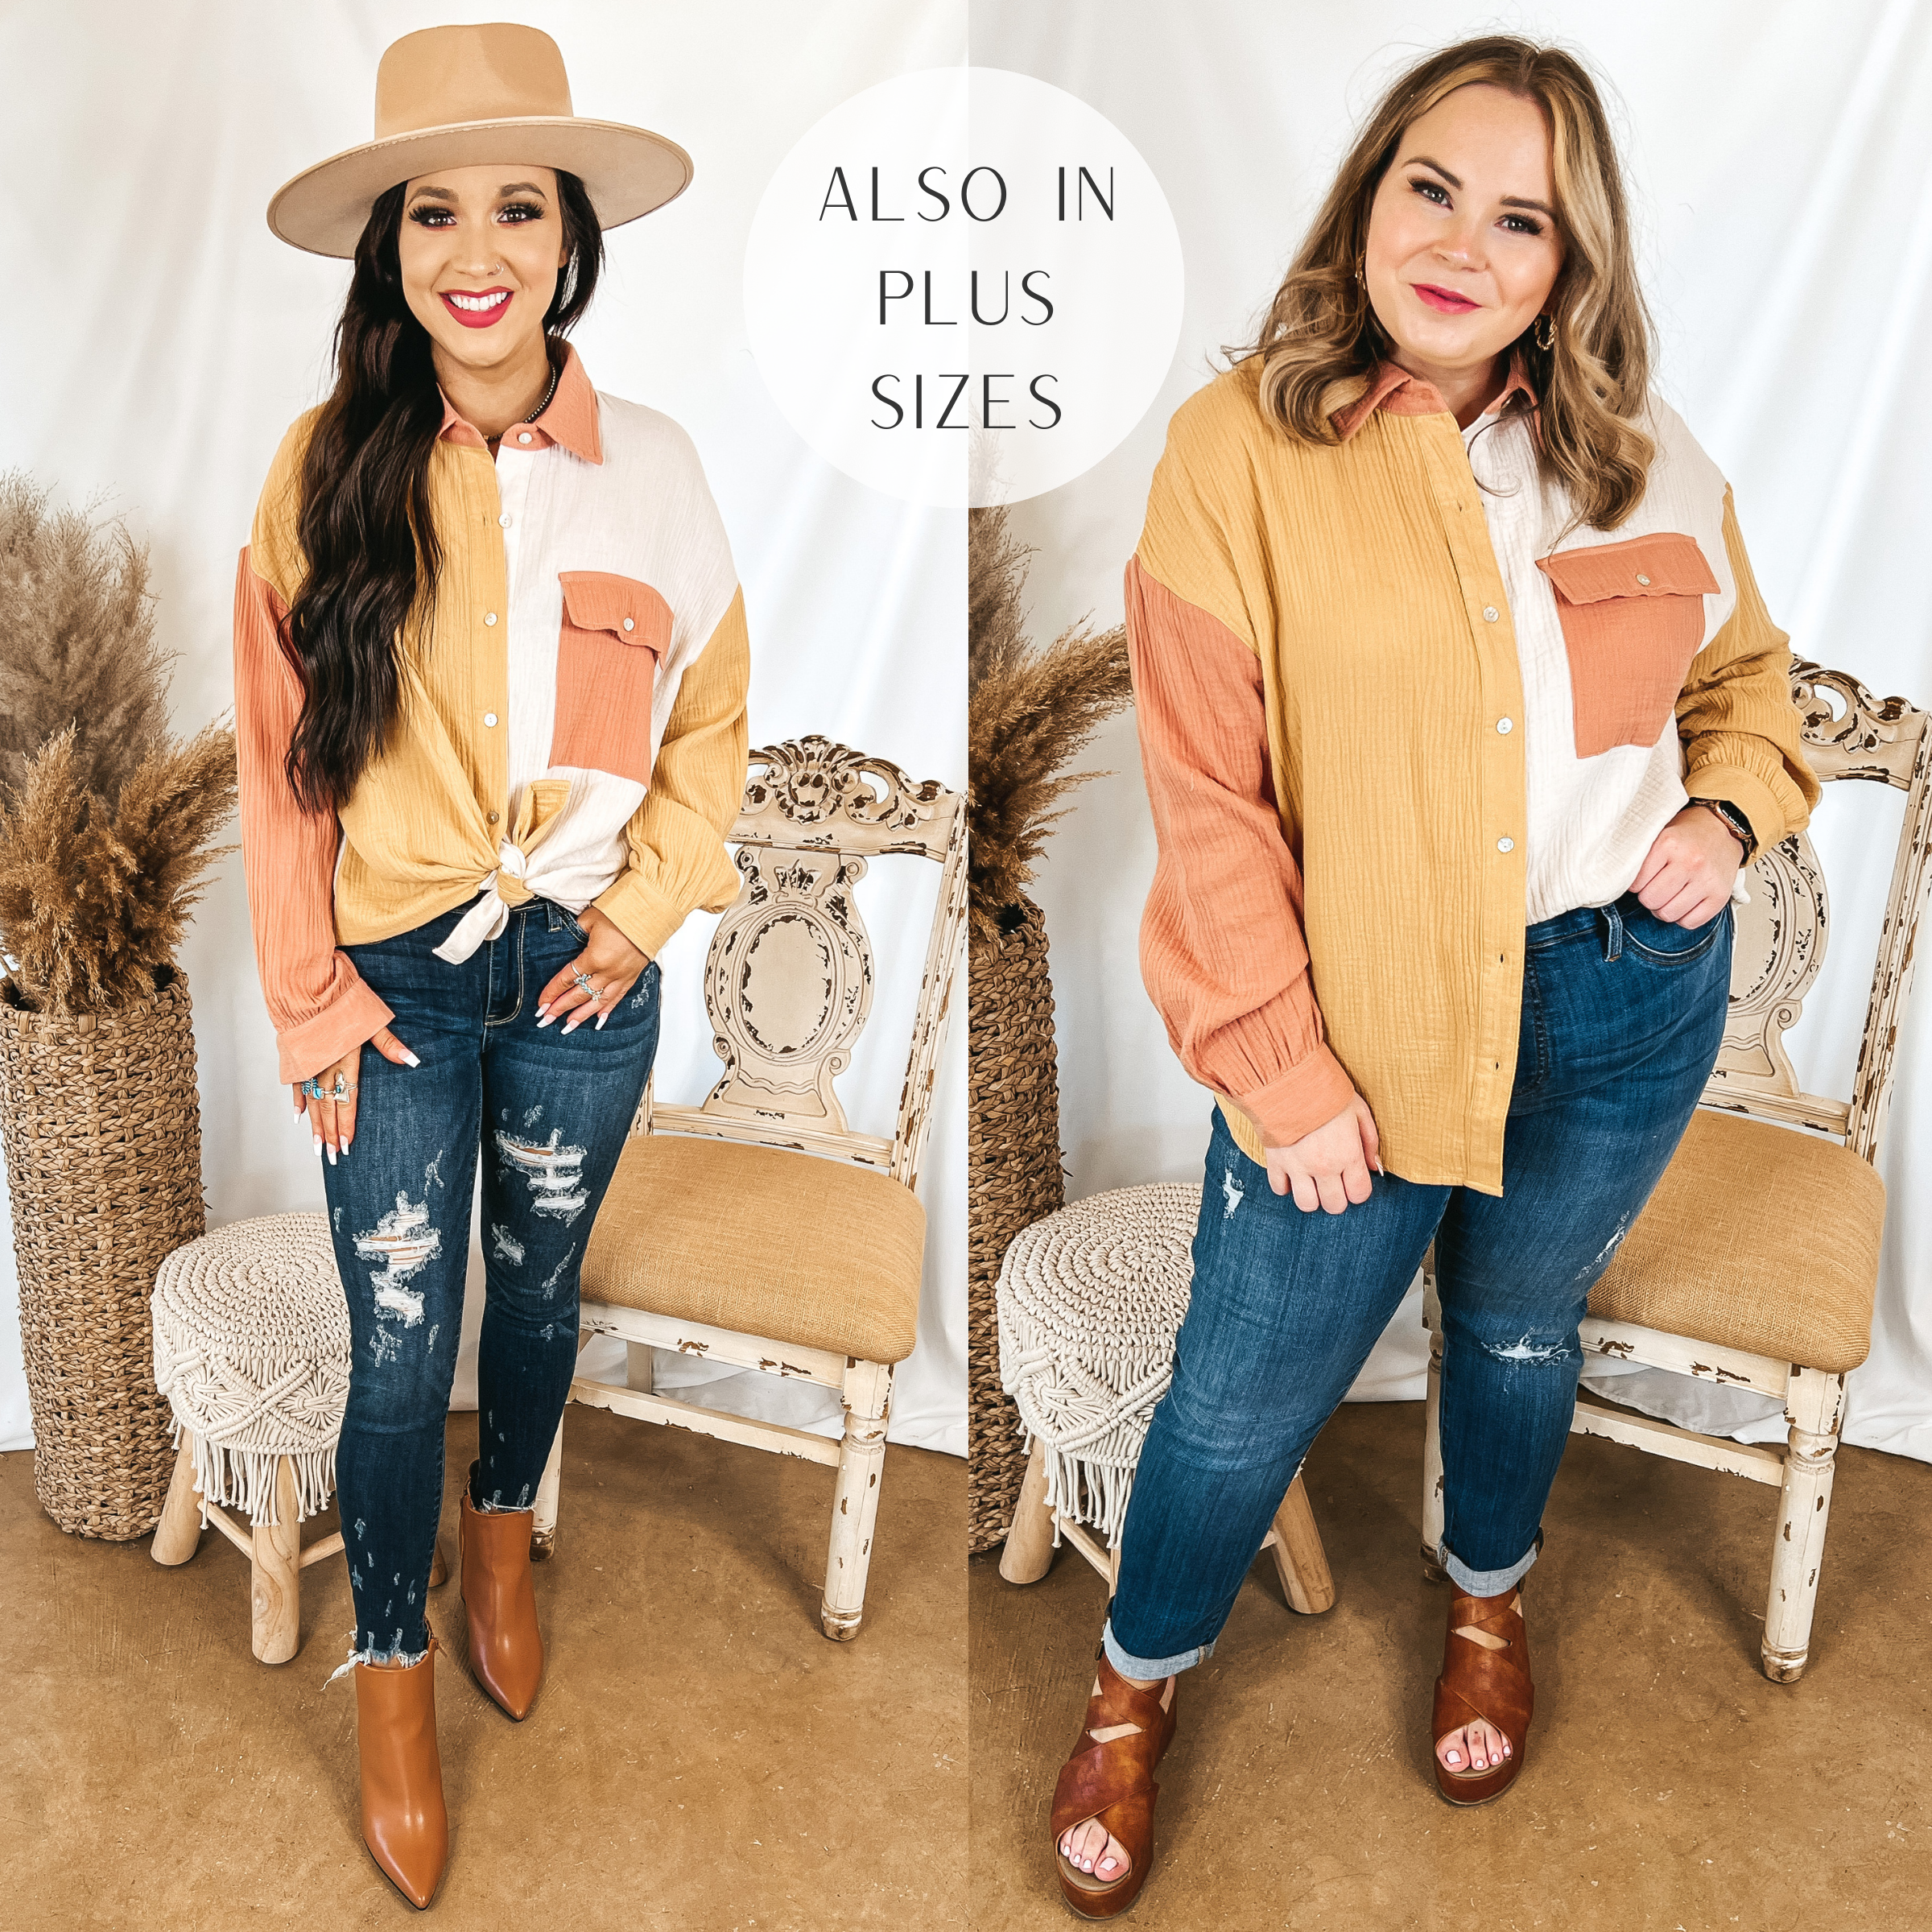 Models are wearing a button up top that is half ivory and half mustard yellow. The top has a dusty orange sleeve, front pocket, and collar. Size small model has it paired with distressed skinny jeans, tan booties, and a tan hat. Size large model has it paired with jeggings, tan wedges, and gold jewelry.